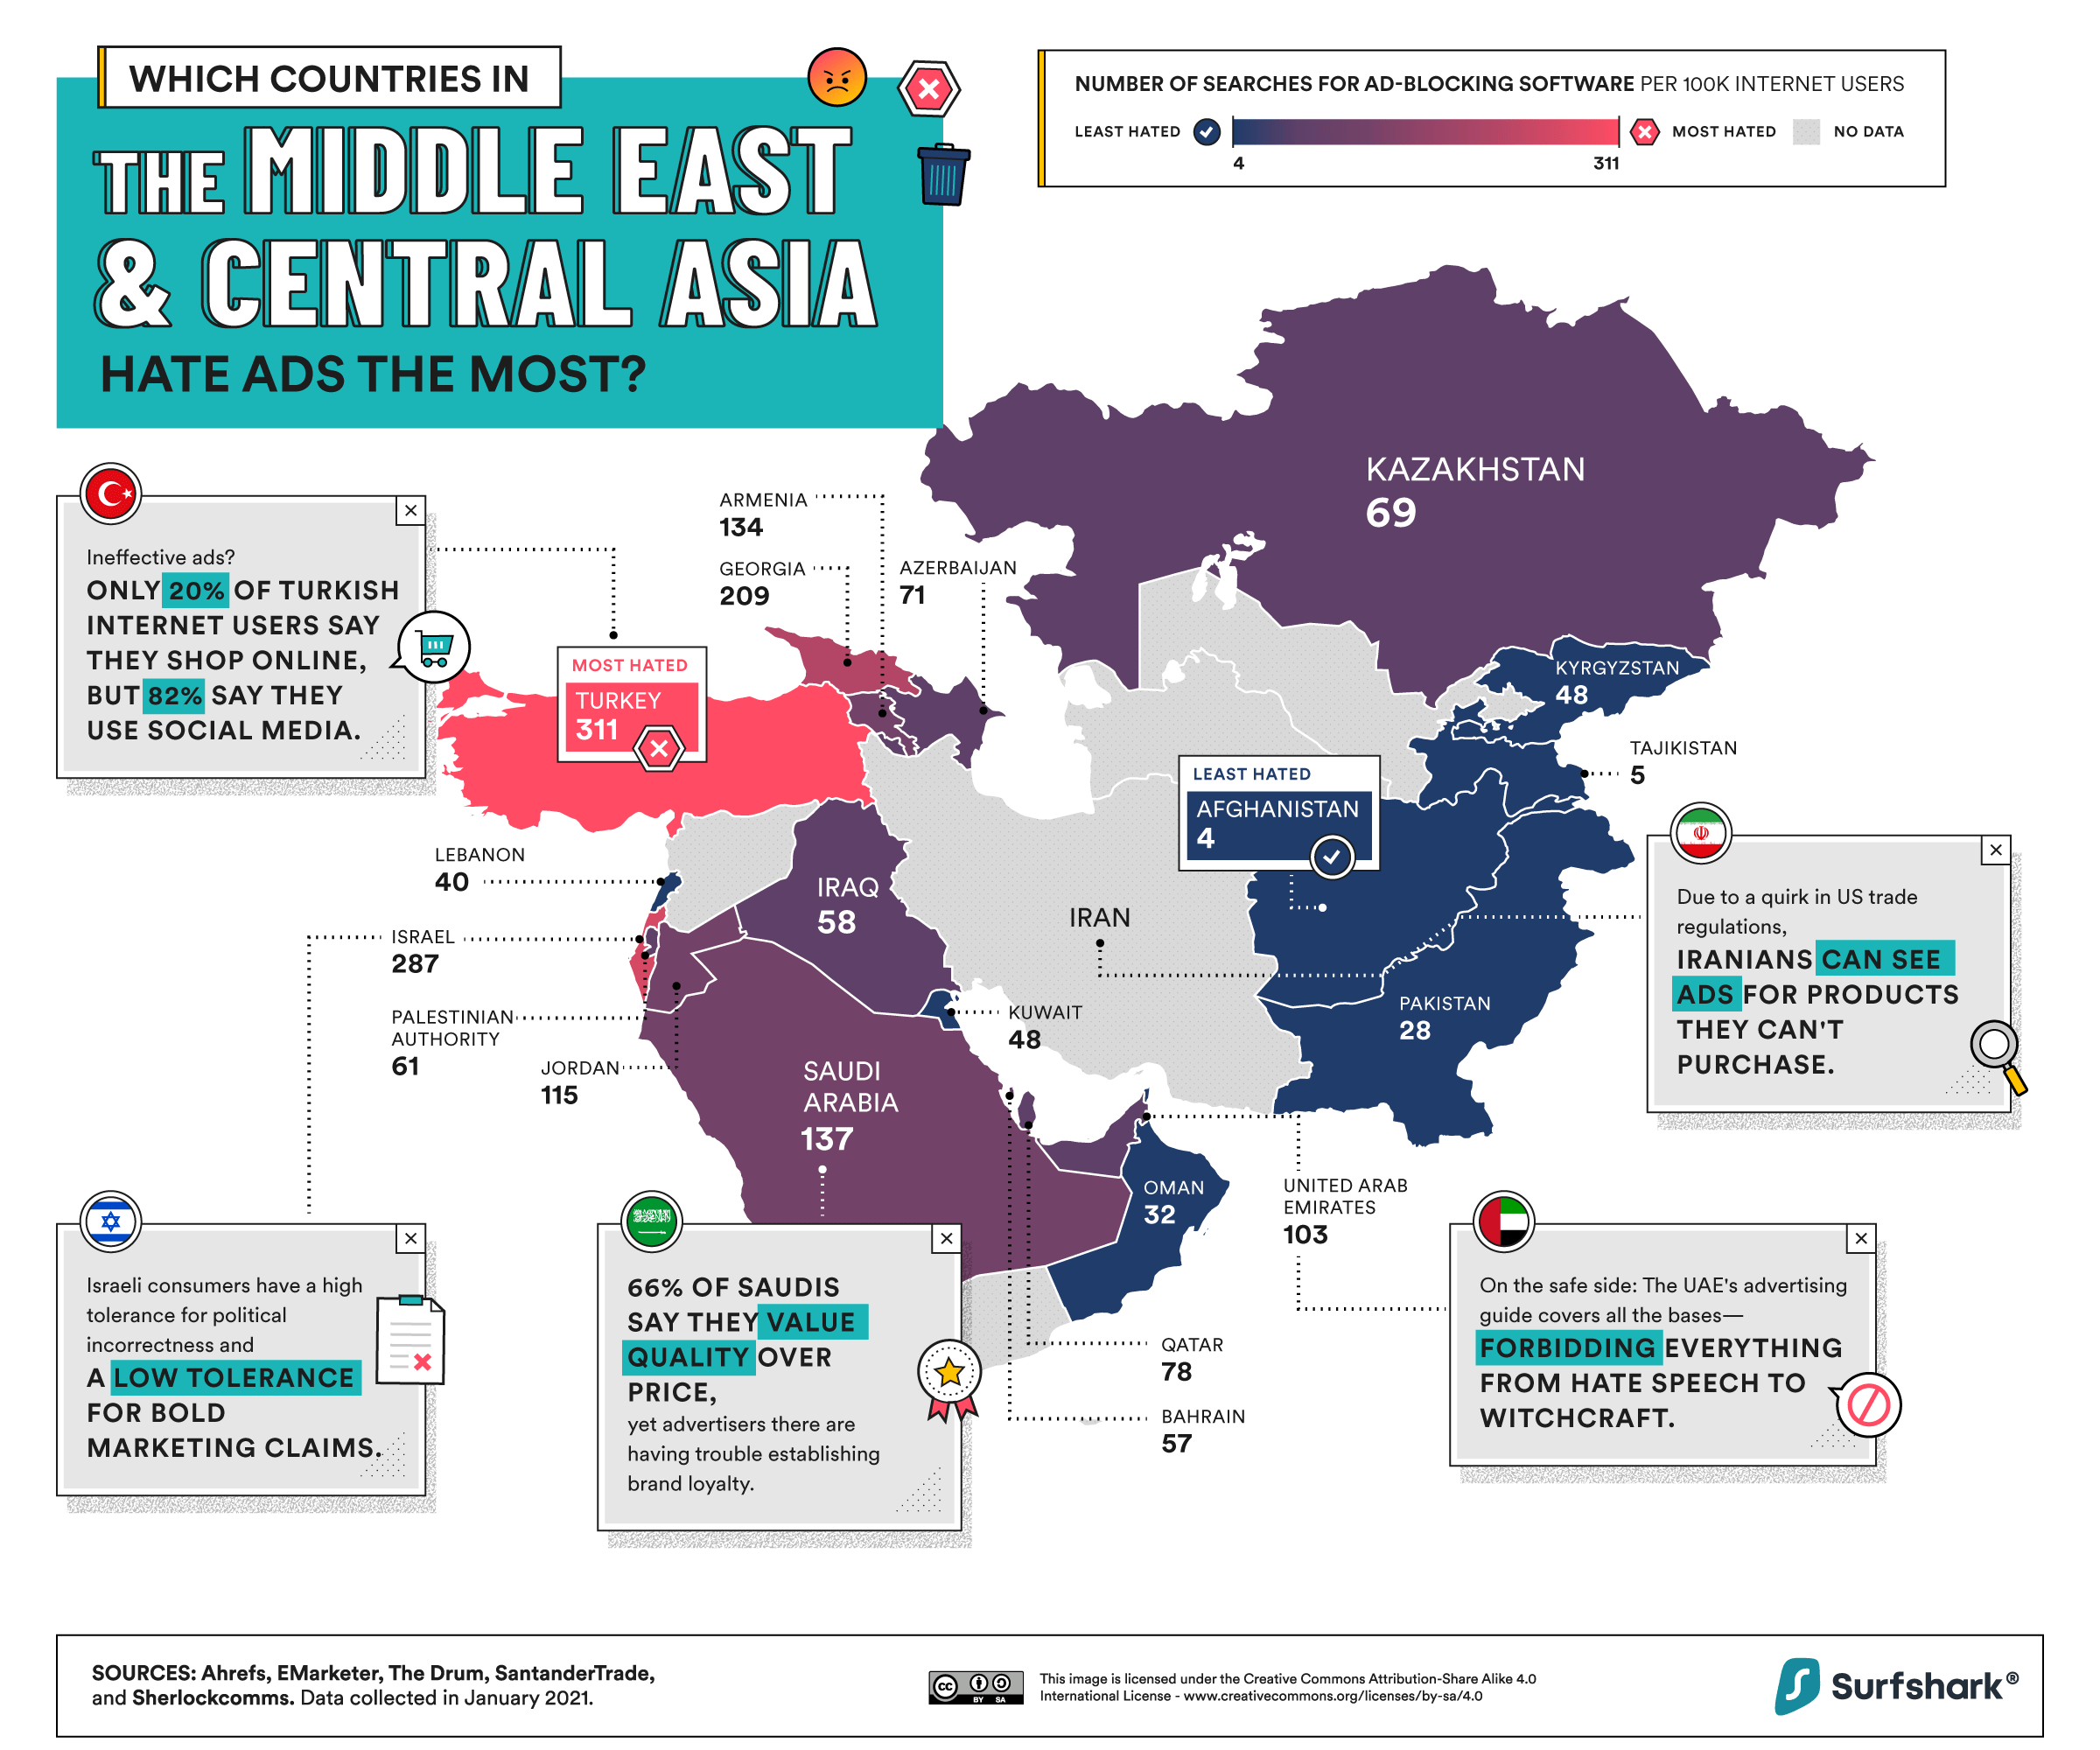 a map showing which countries in the Middle East and Central Asia made the most Google searches for ad blocking software